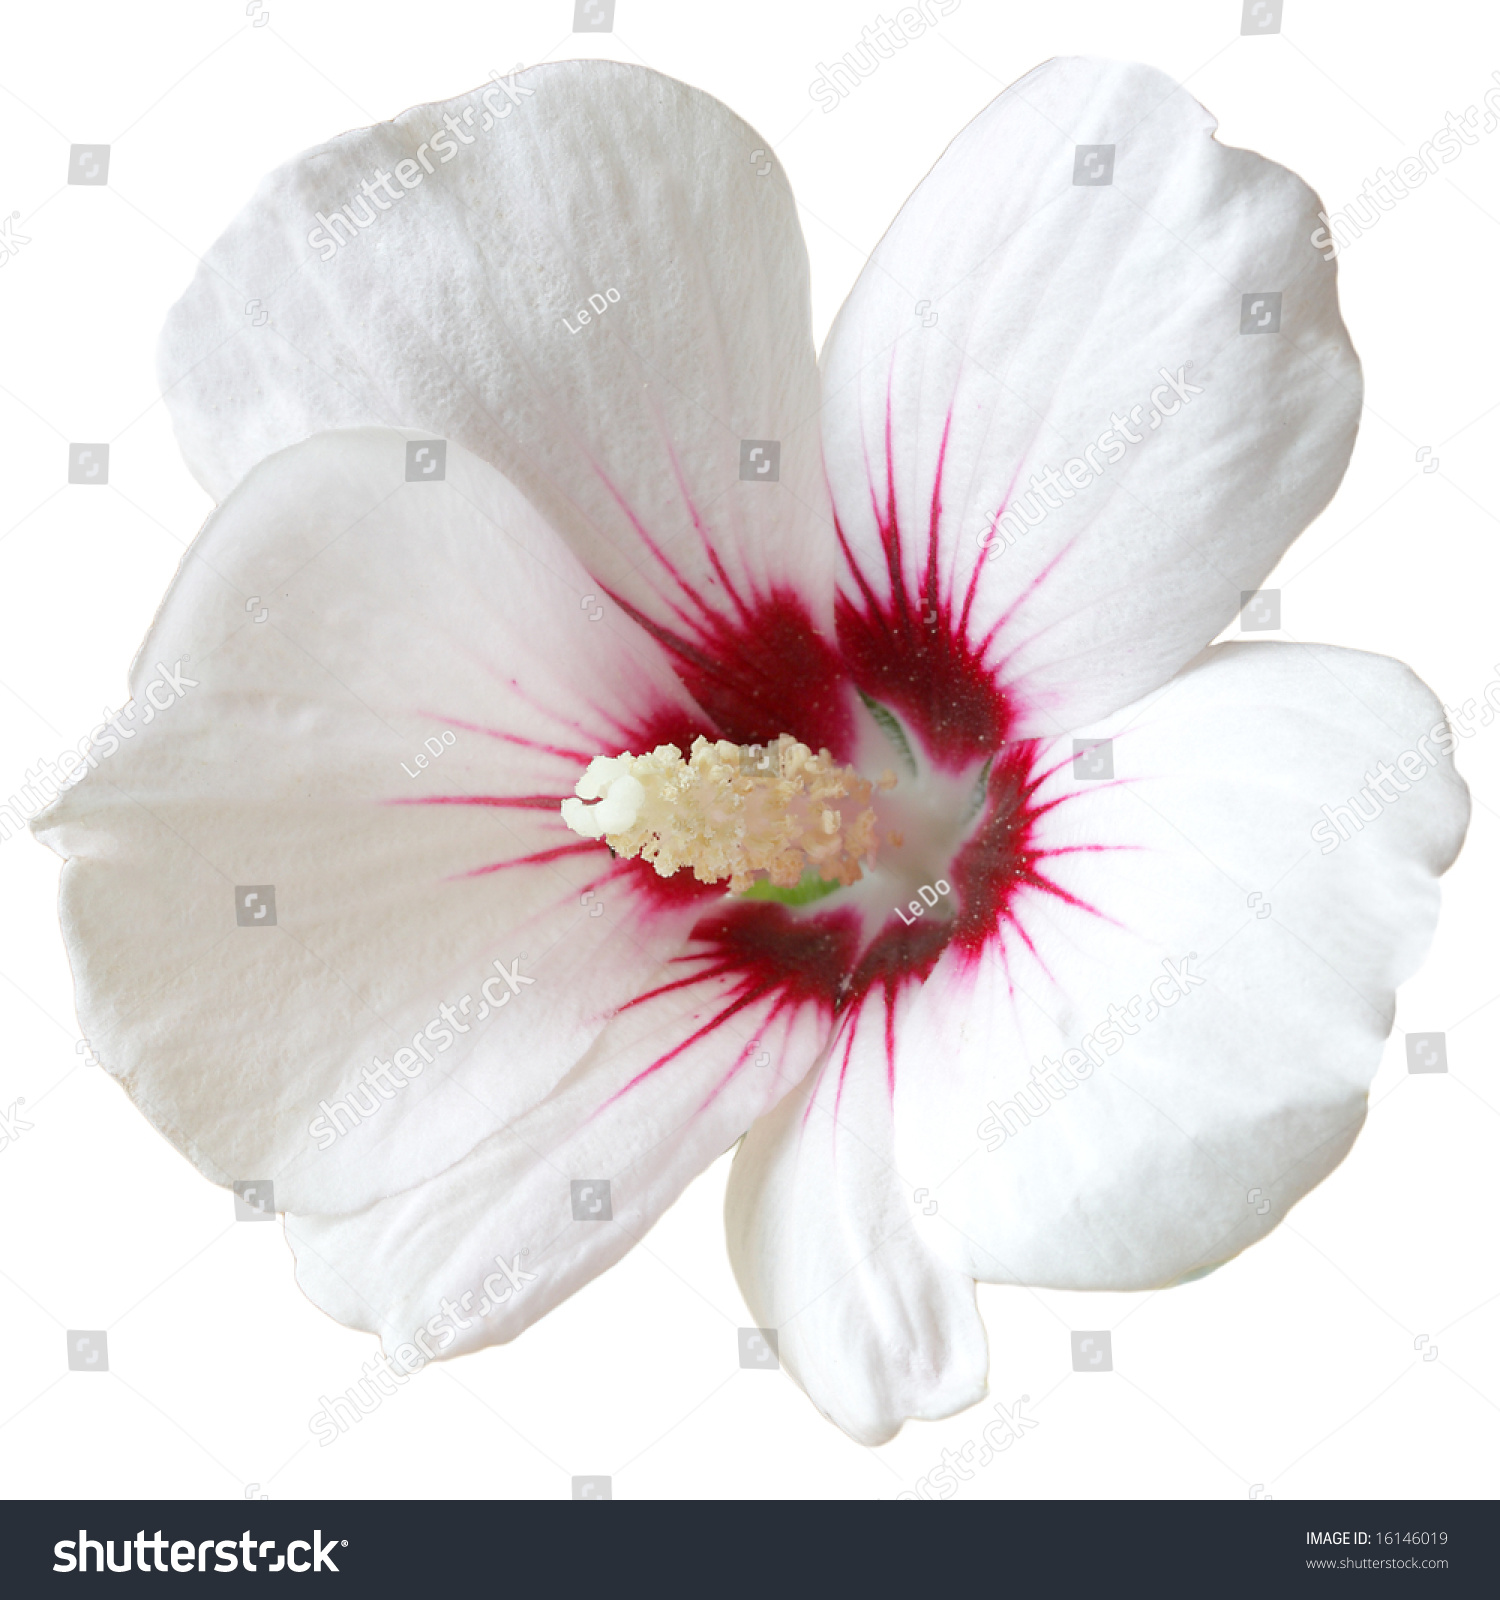 White Hibiscus With Red In The Center Isolated On White Background Stock Photo